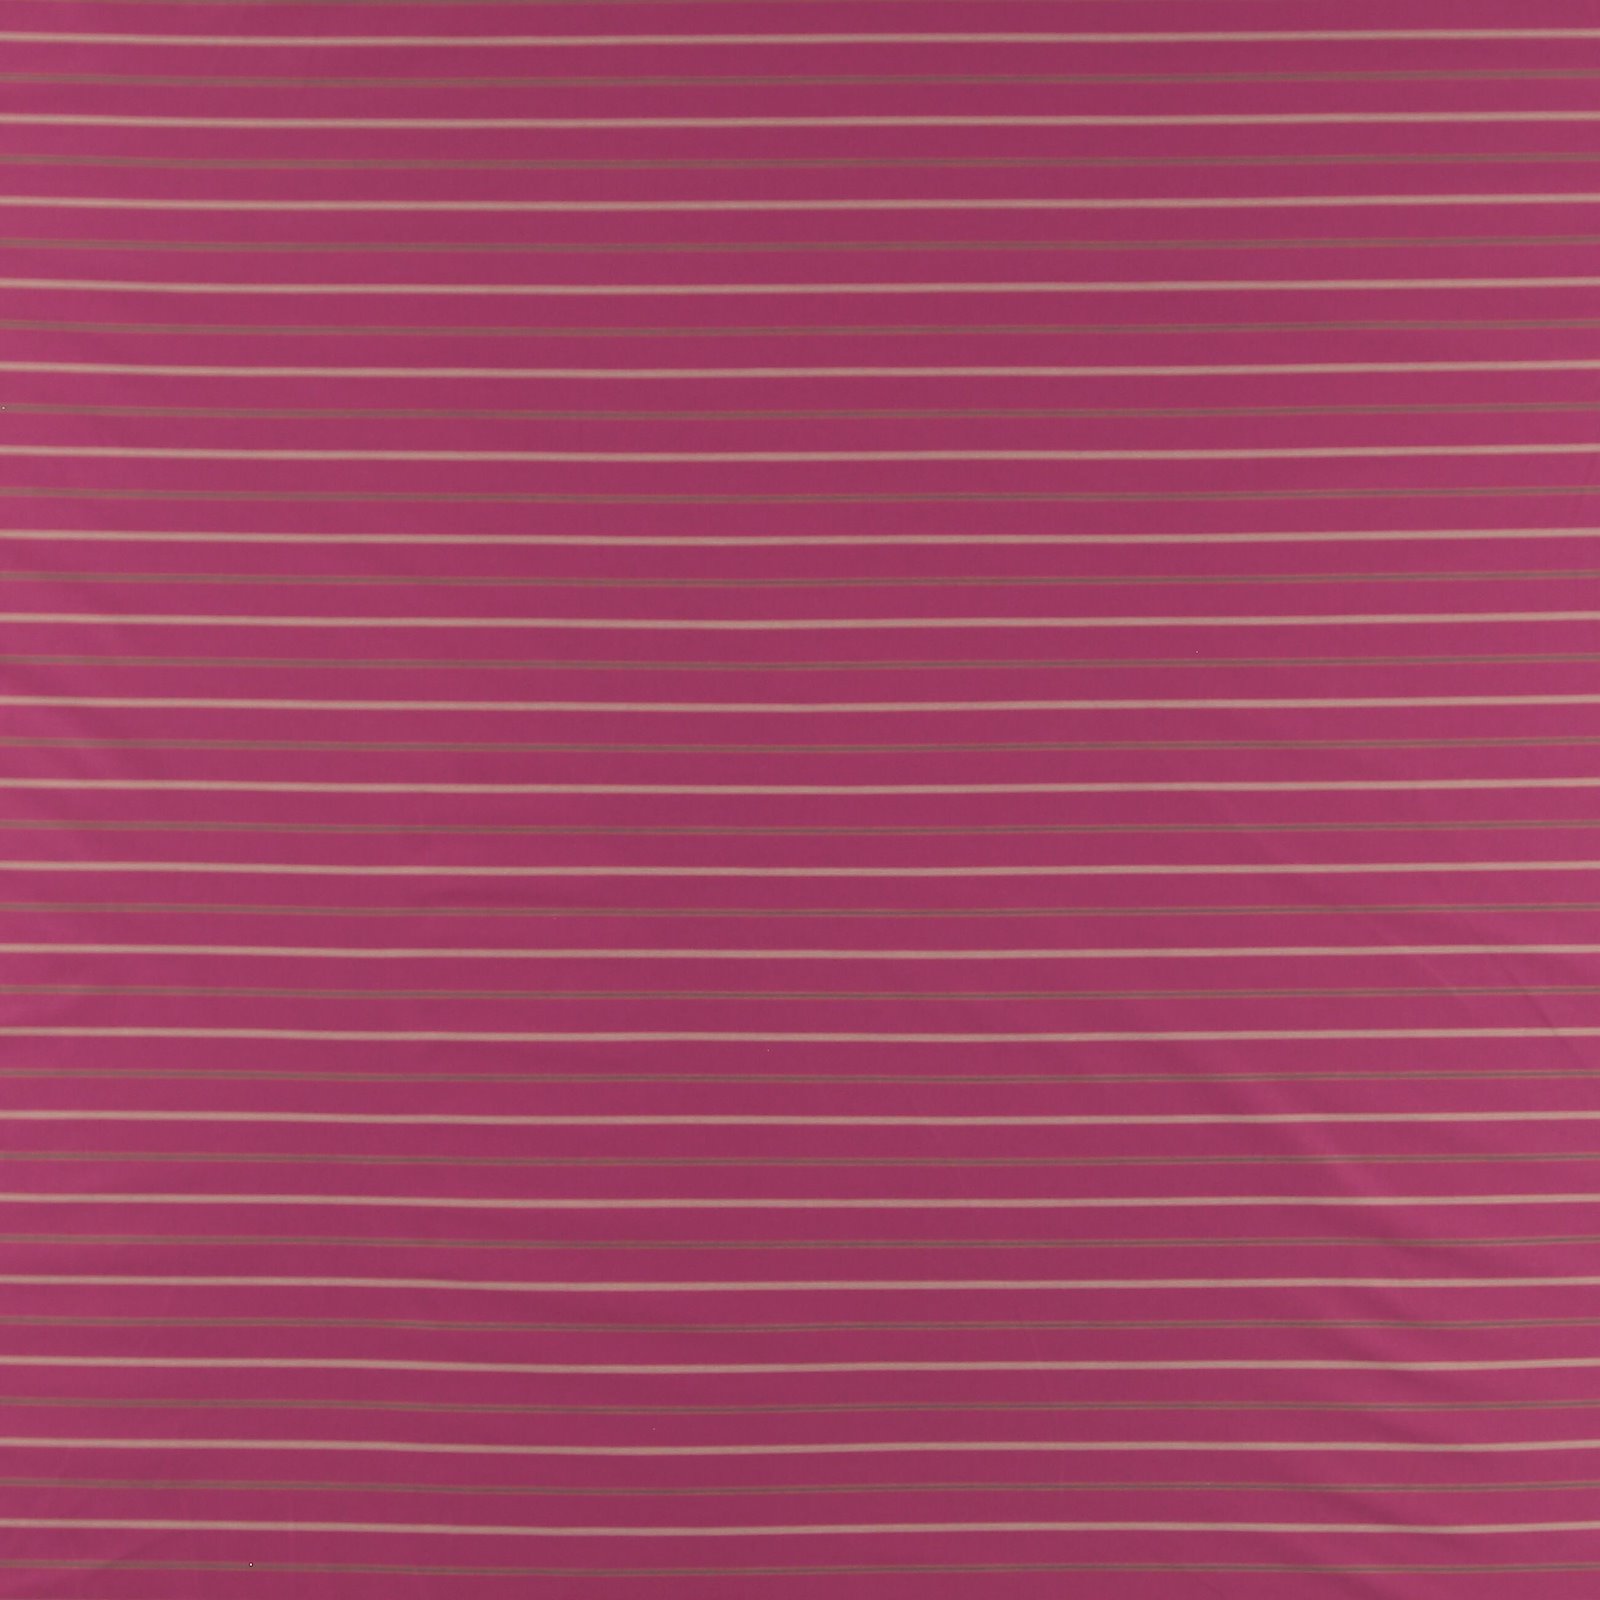 Woven cotton w stretch pink YD stripes 501987_pack_sp